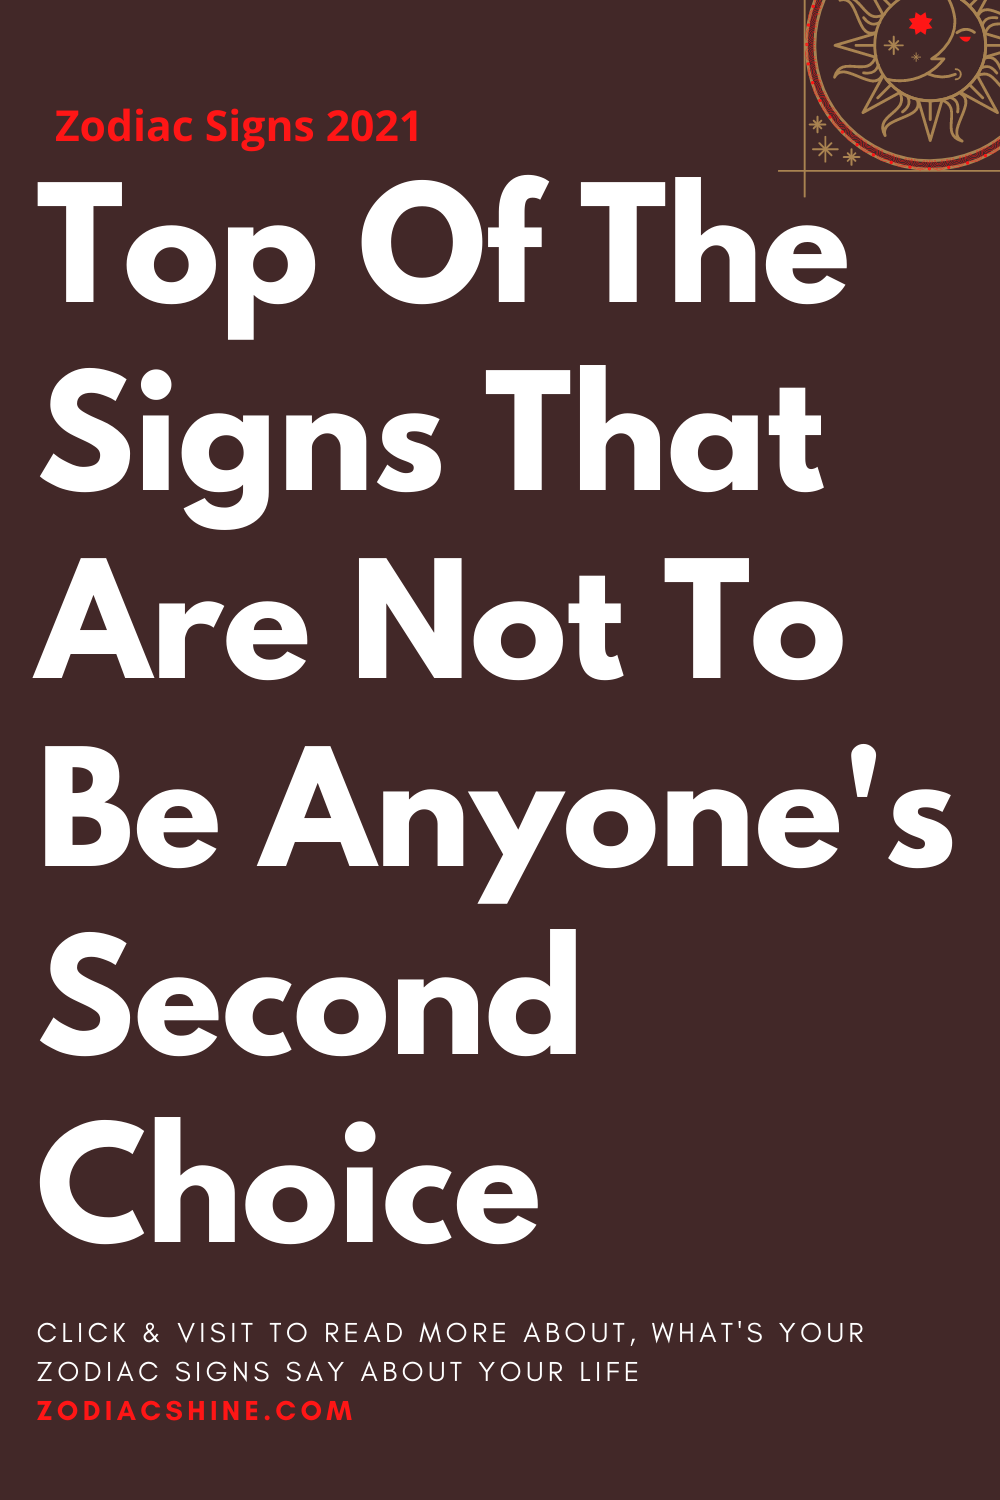 Top Of The Signs That Are Not To Be Anyone's Second Choice